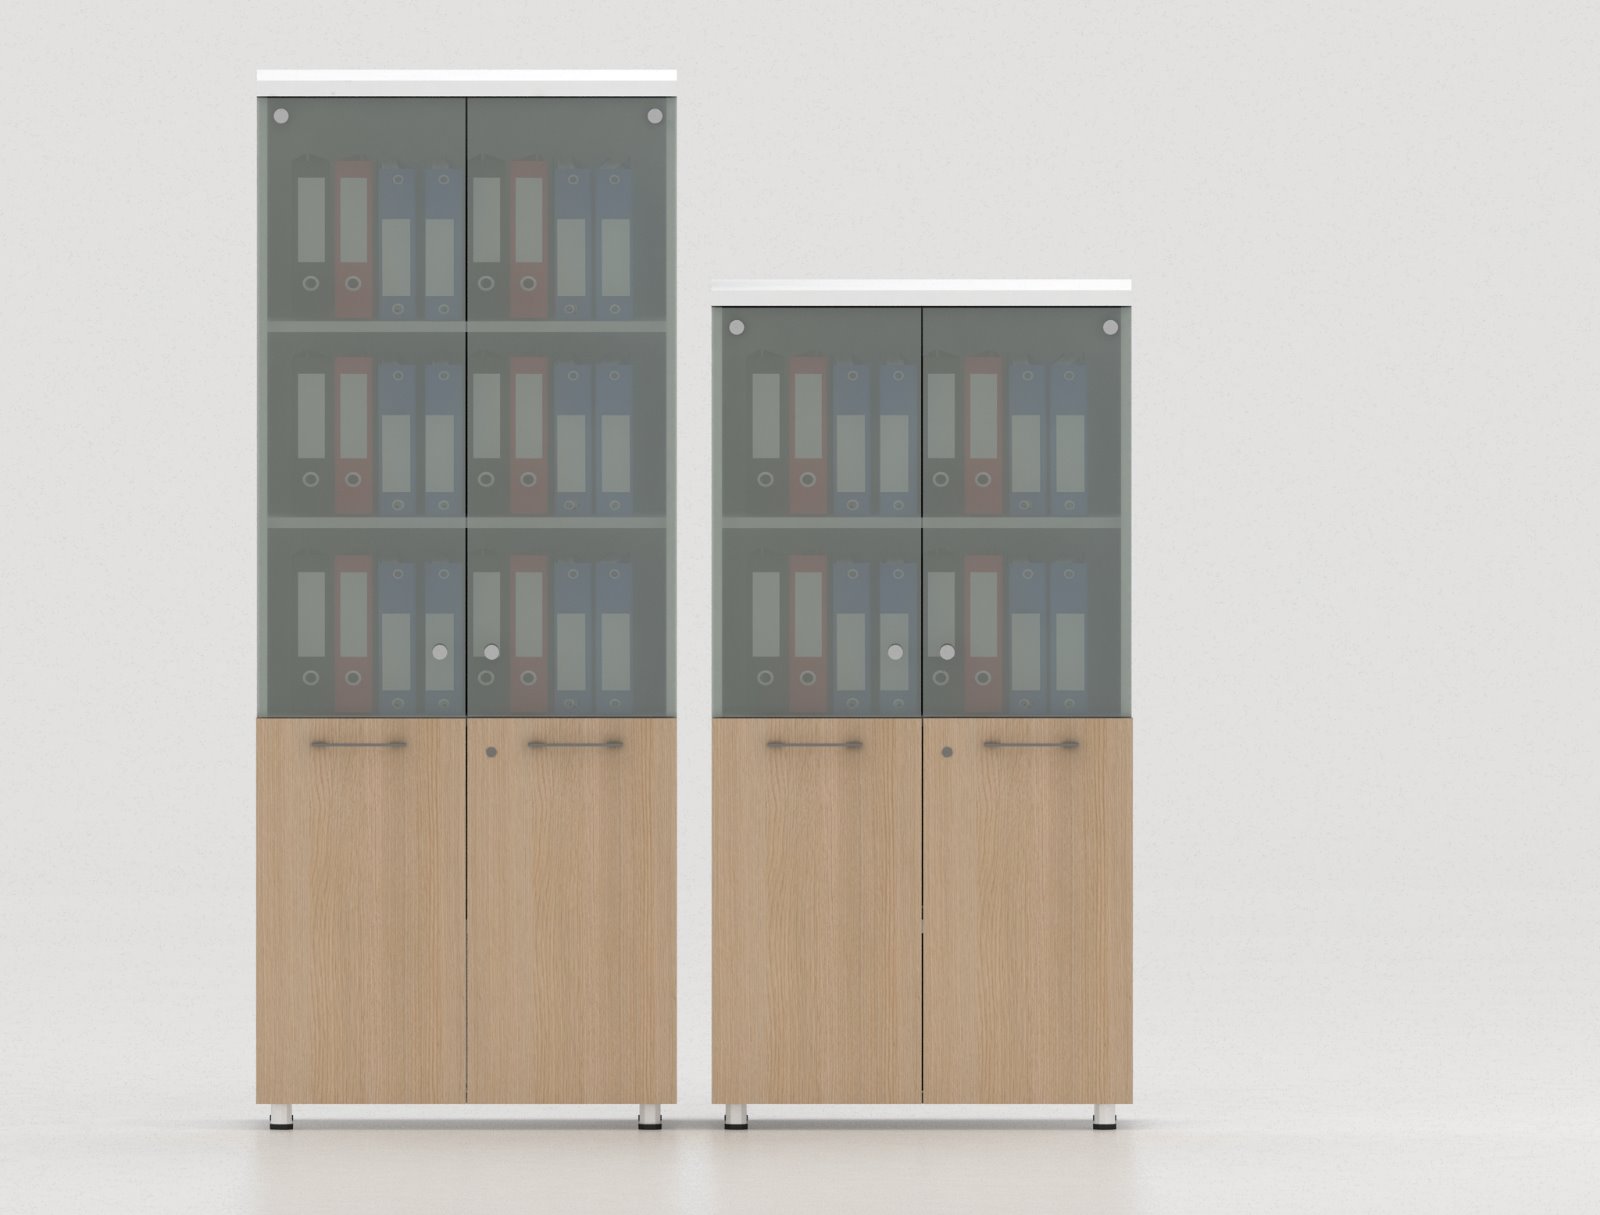 Group 5 (Cabinets With Doors And Glass Doors)